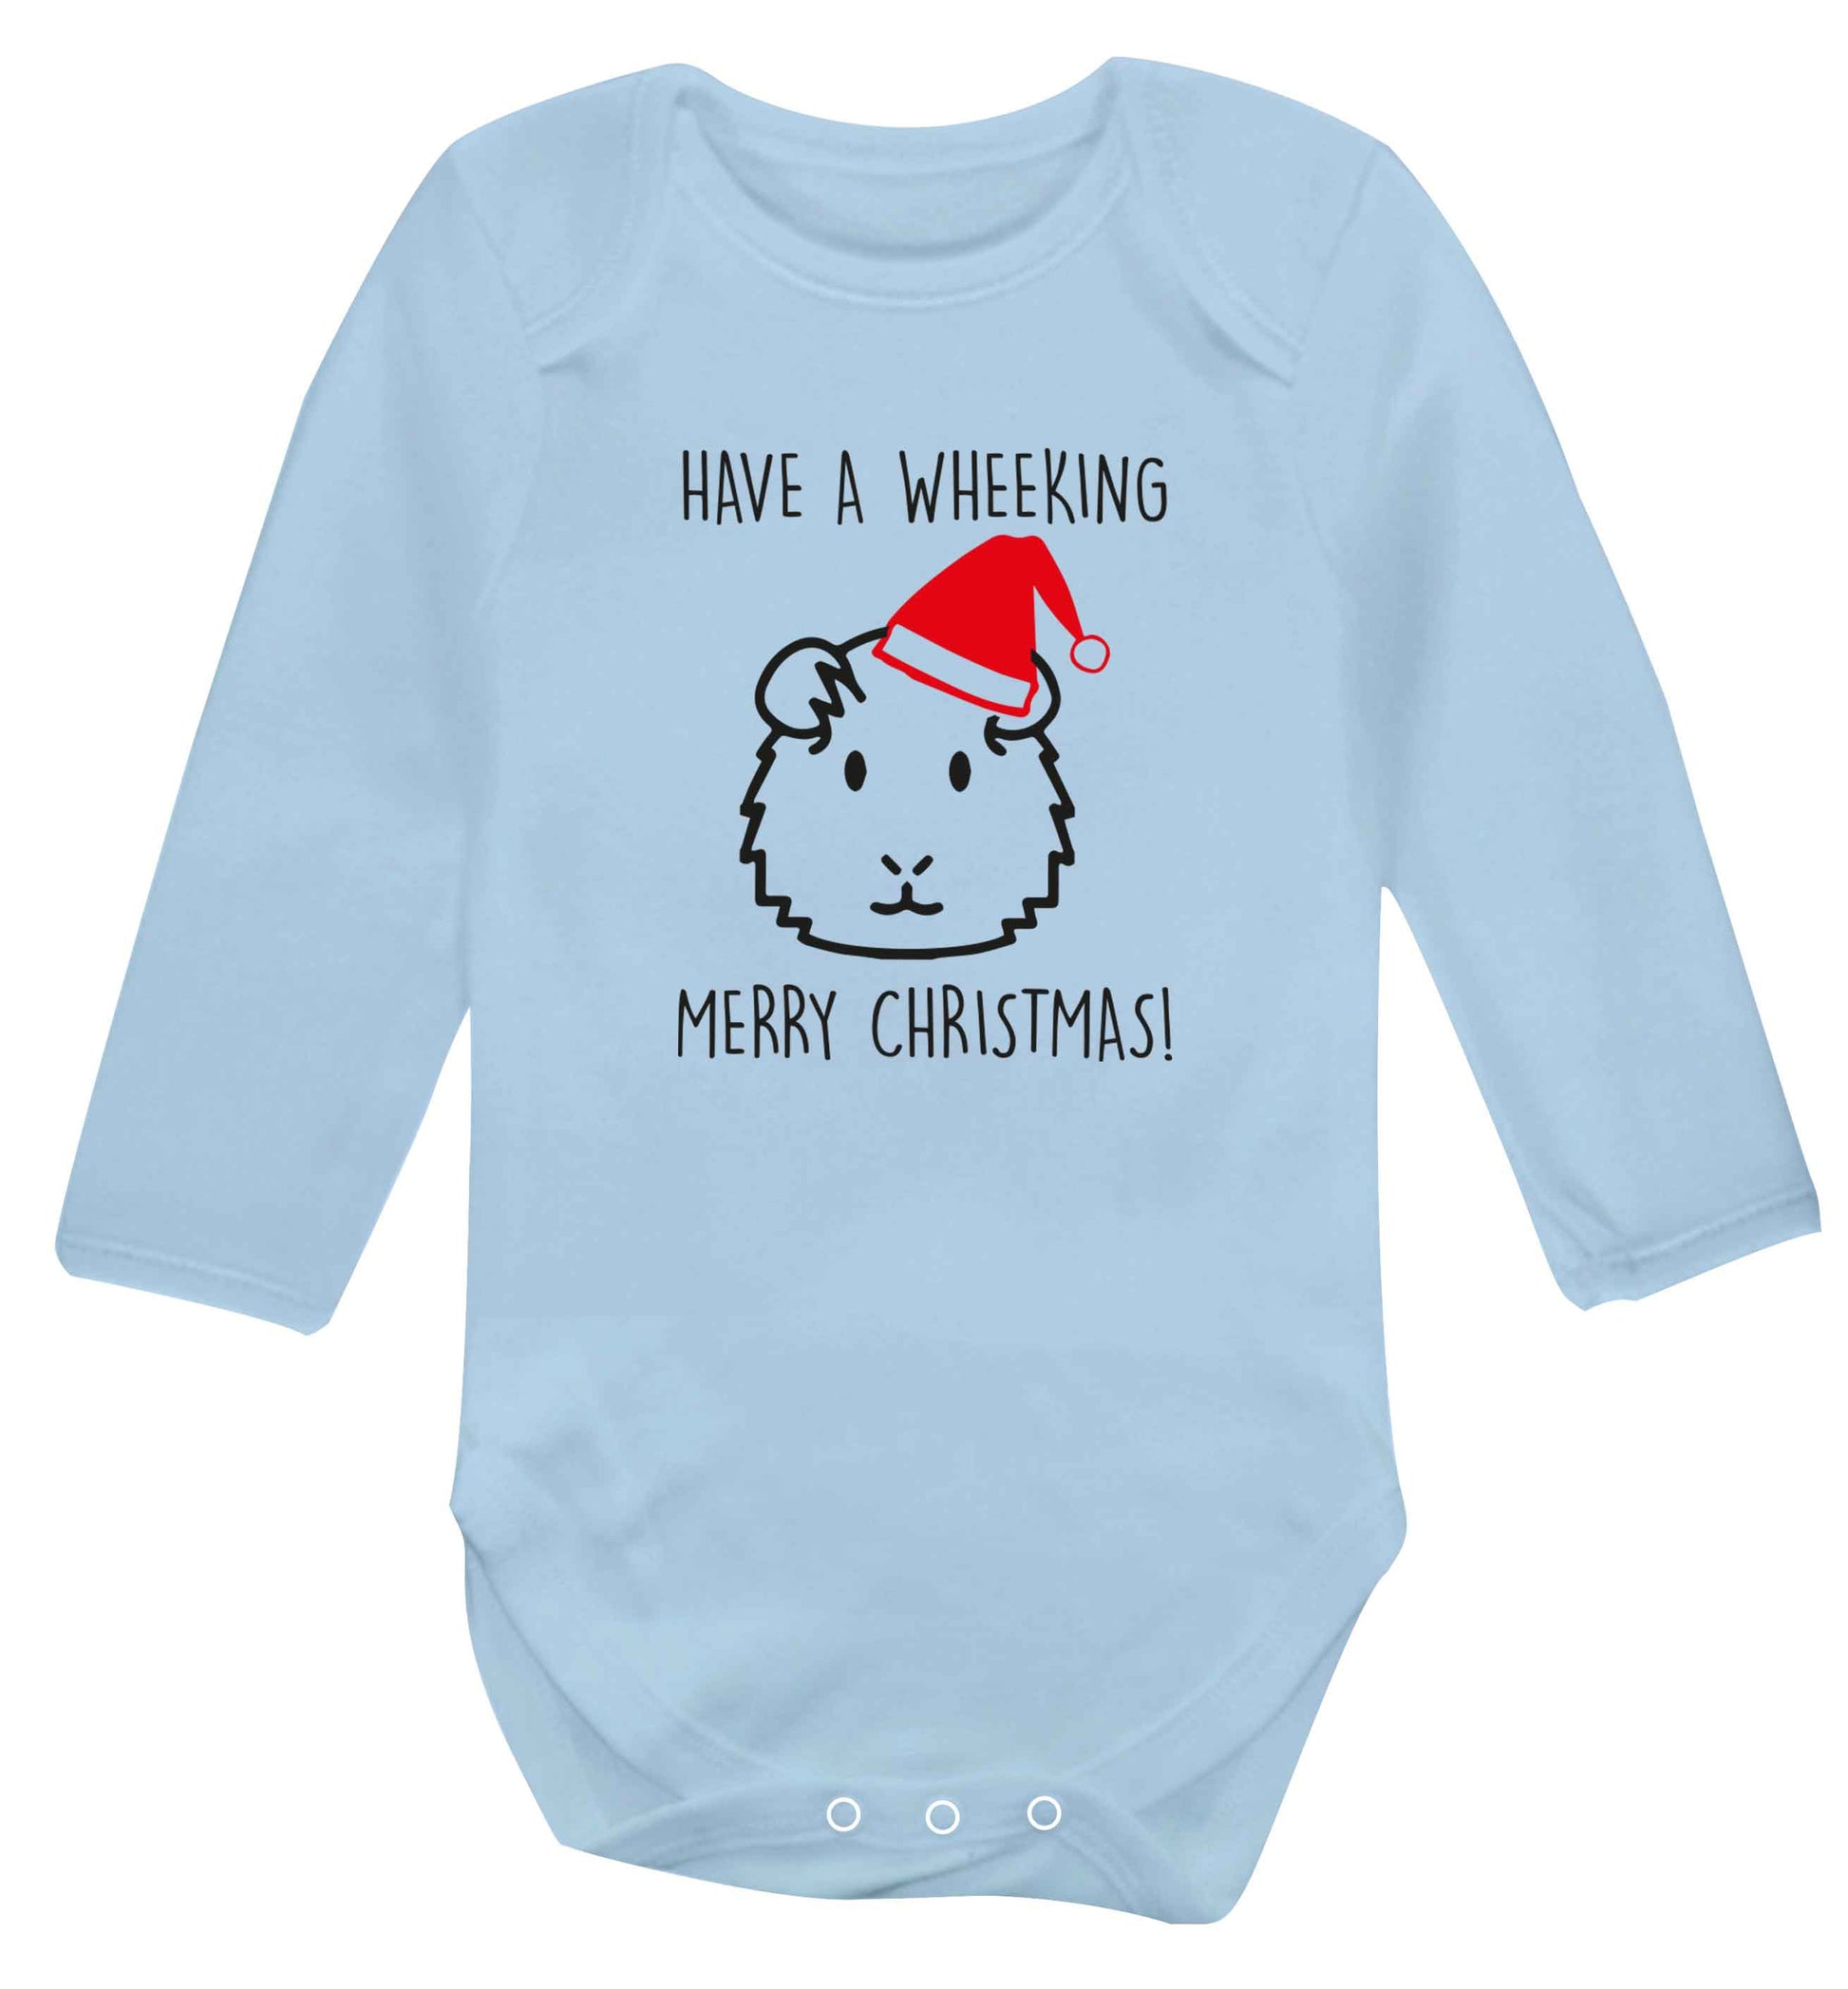 Have a wheeking merry Christmas baby vest long sleeved pale blue 6-12 months